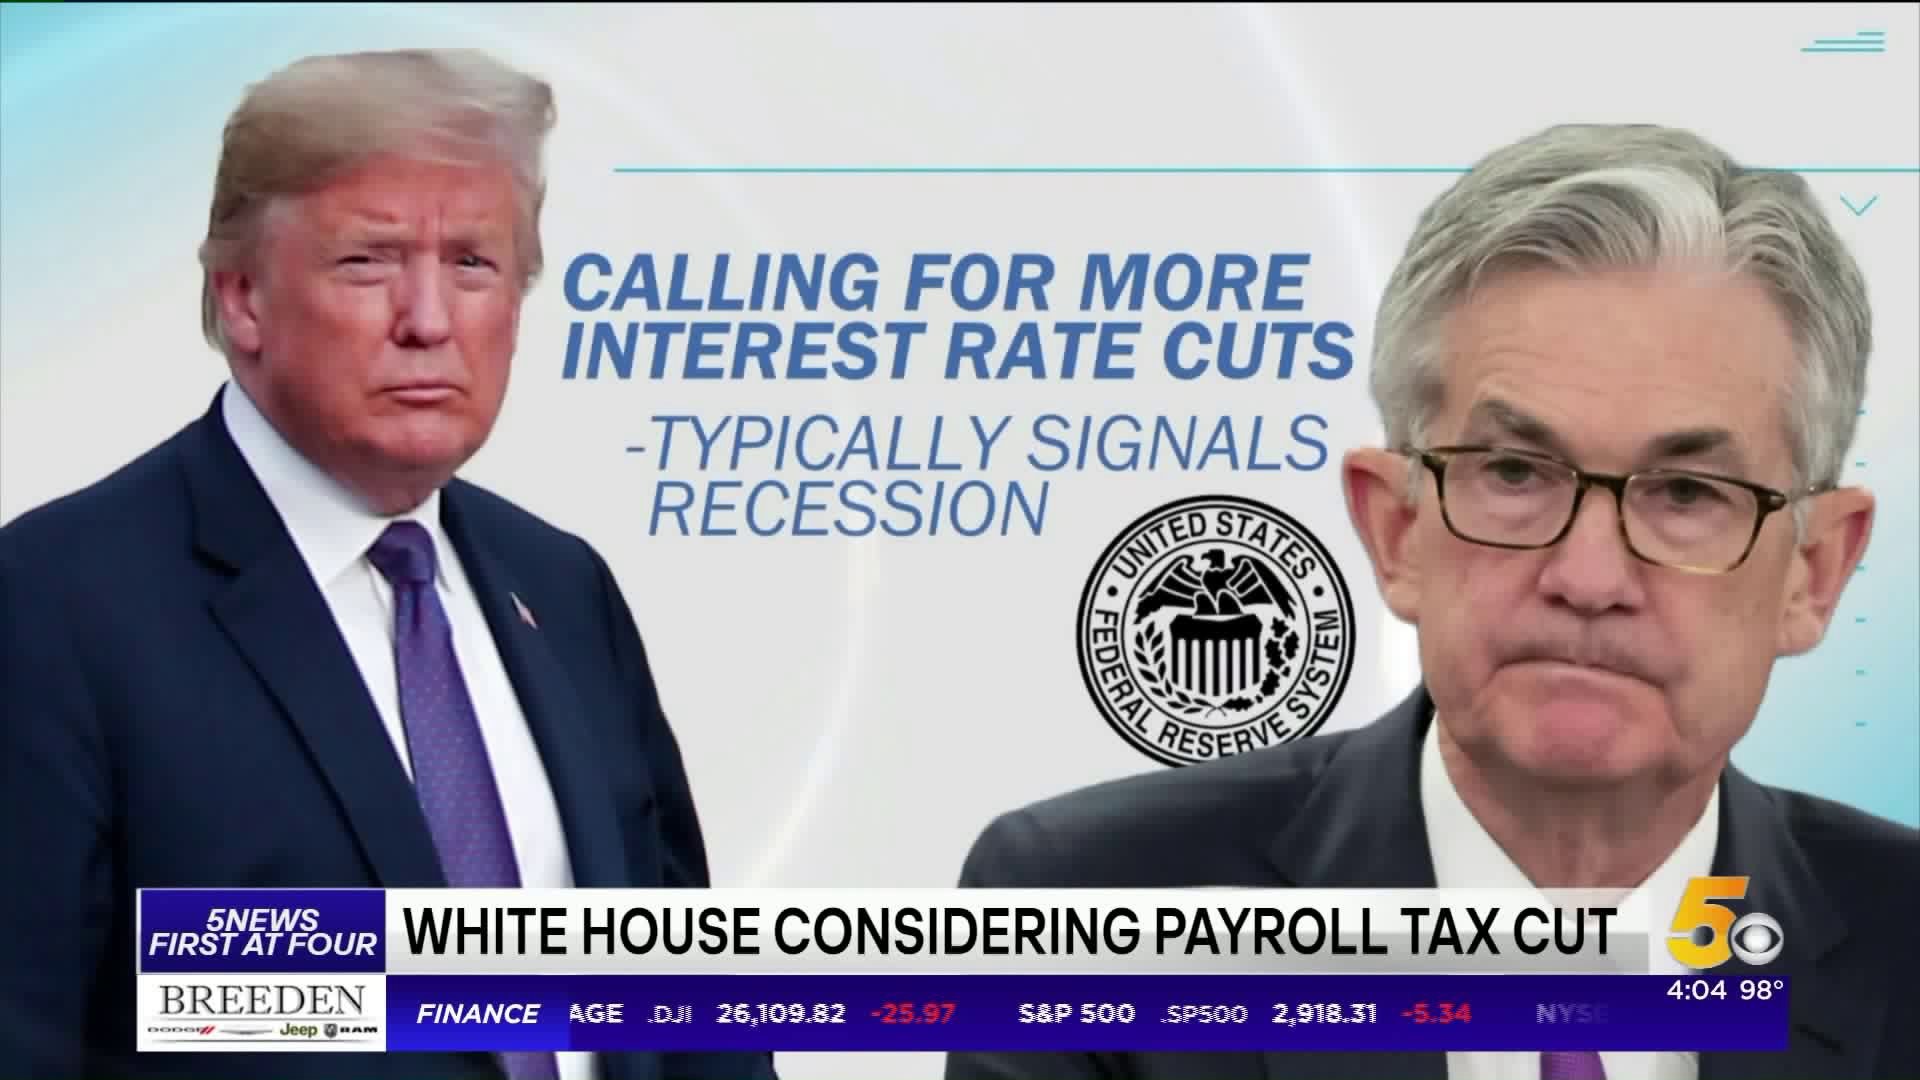 White House Considering Payroll Tax Cut